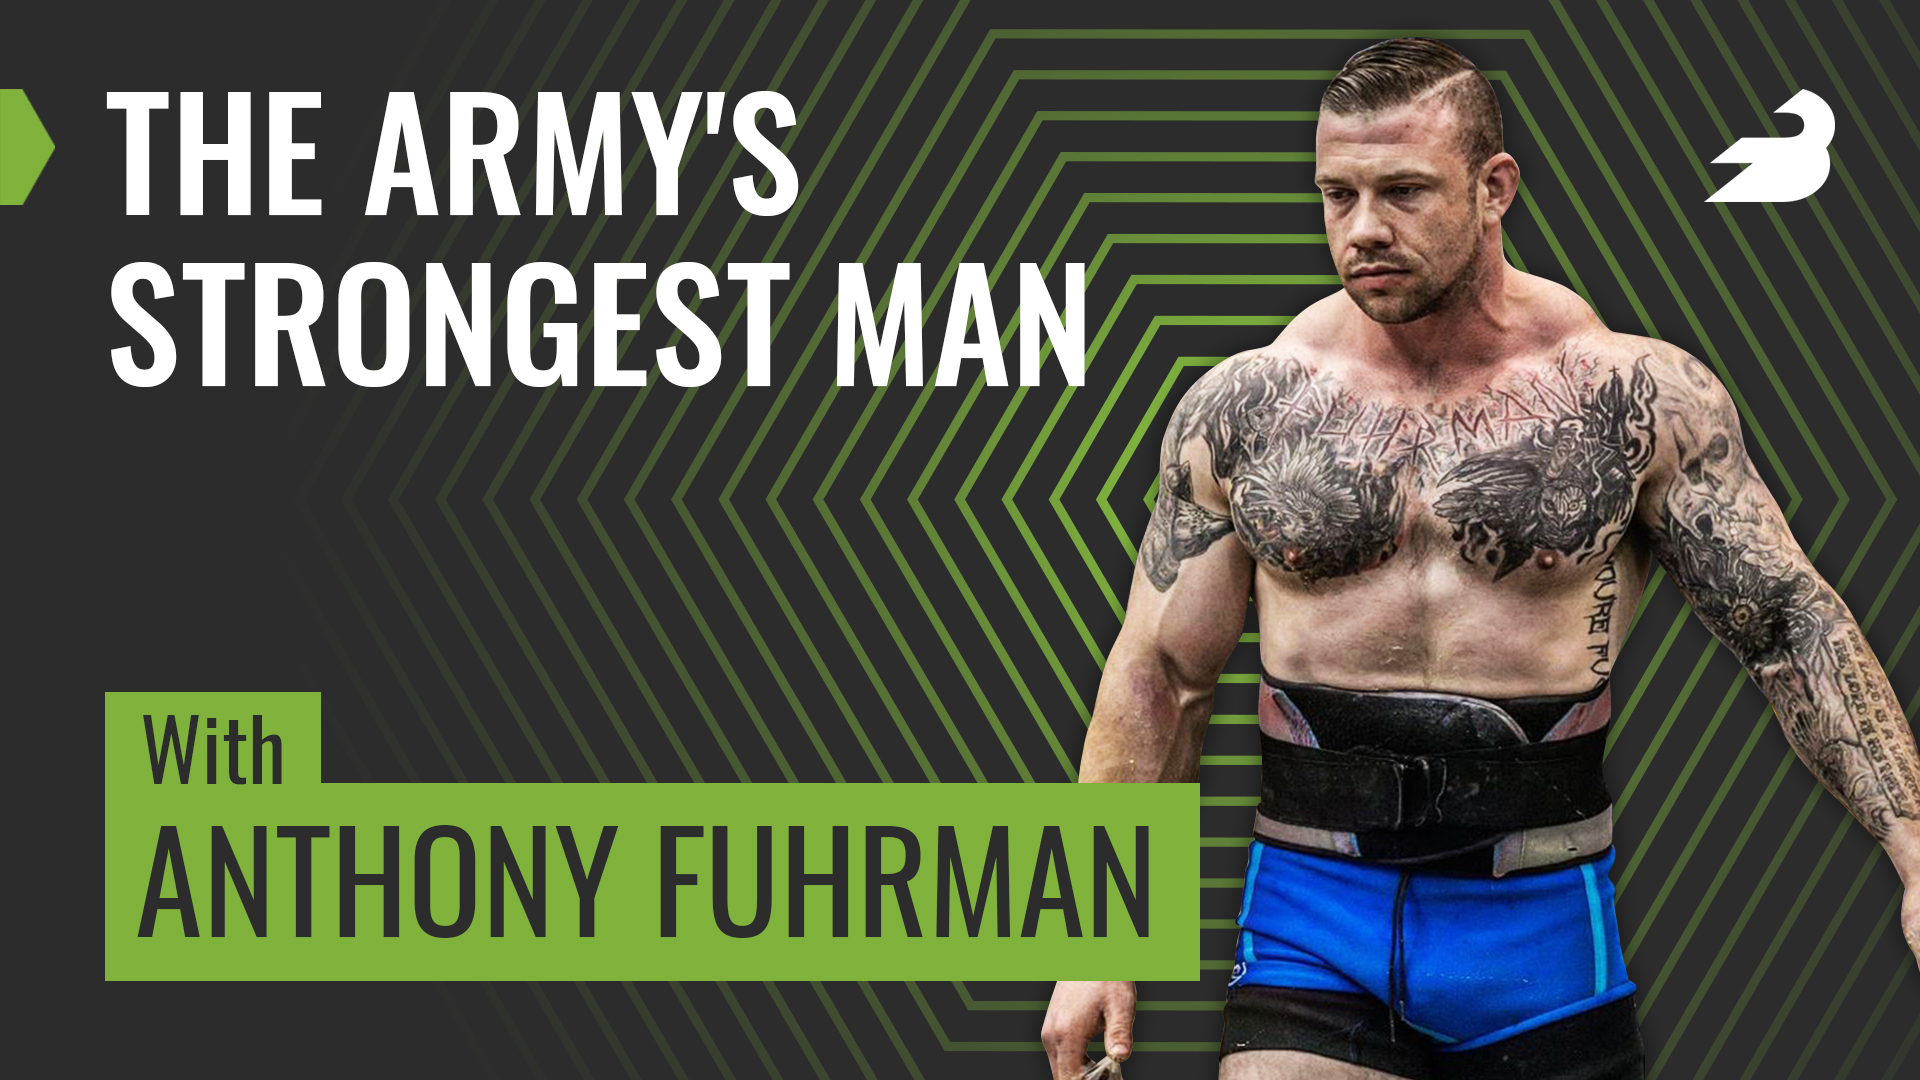 The Armys Strongest Man (with Anthony Fuhrman) BarBend image picture